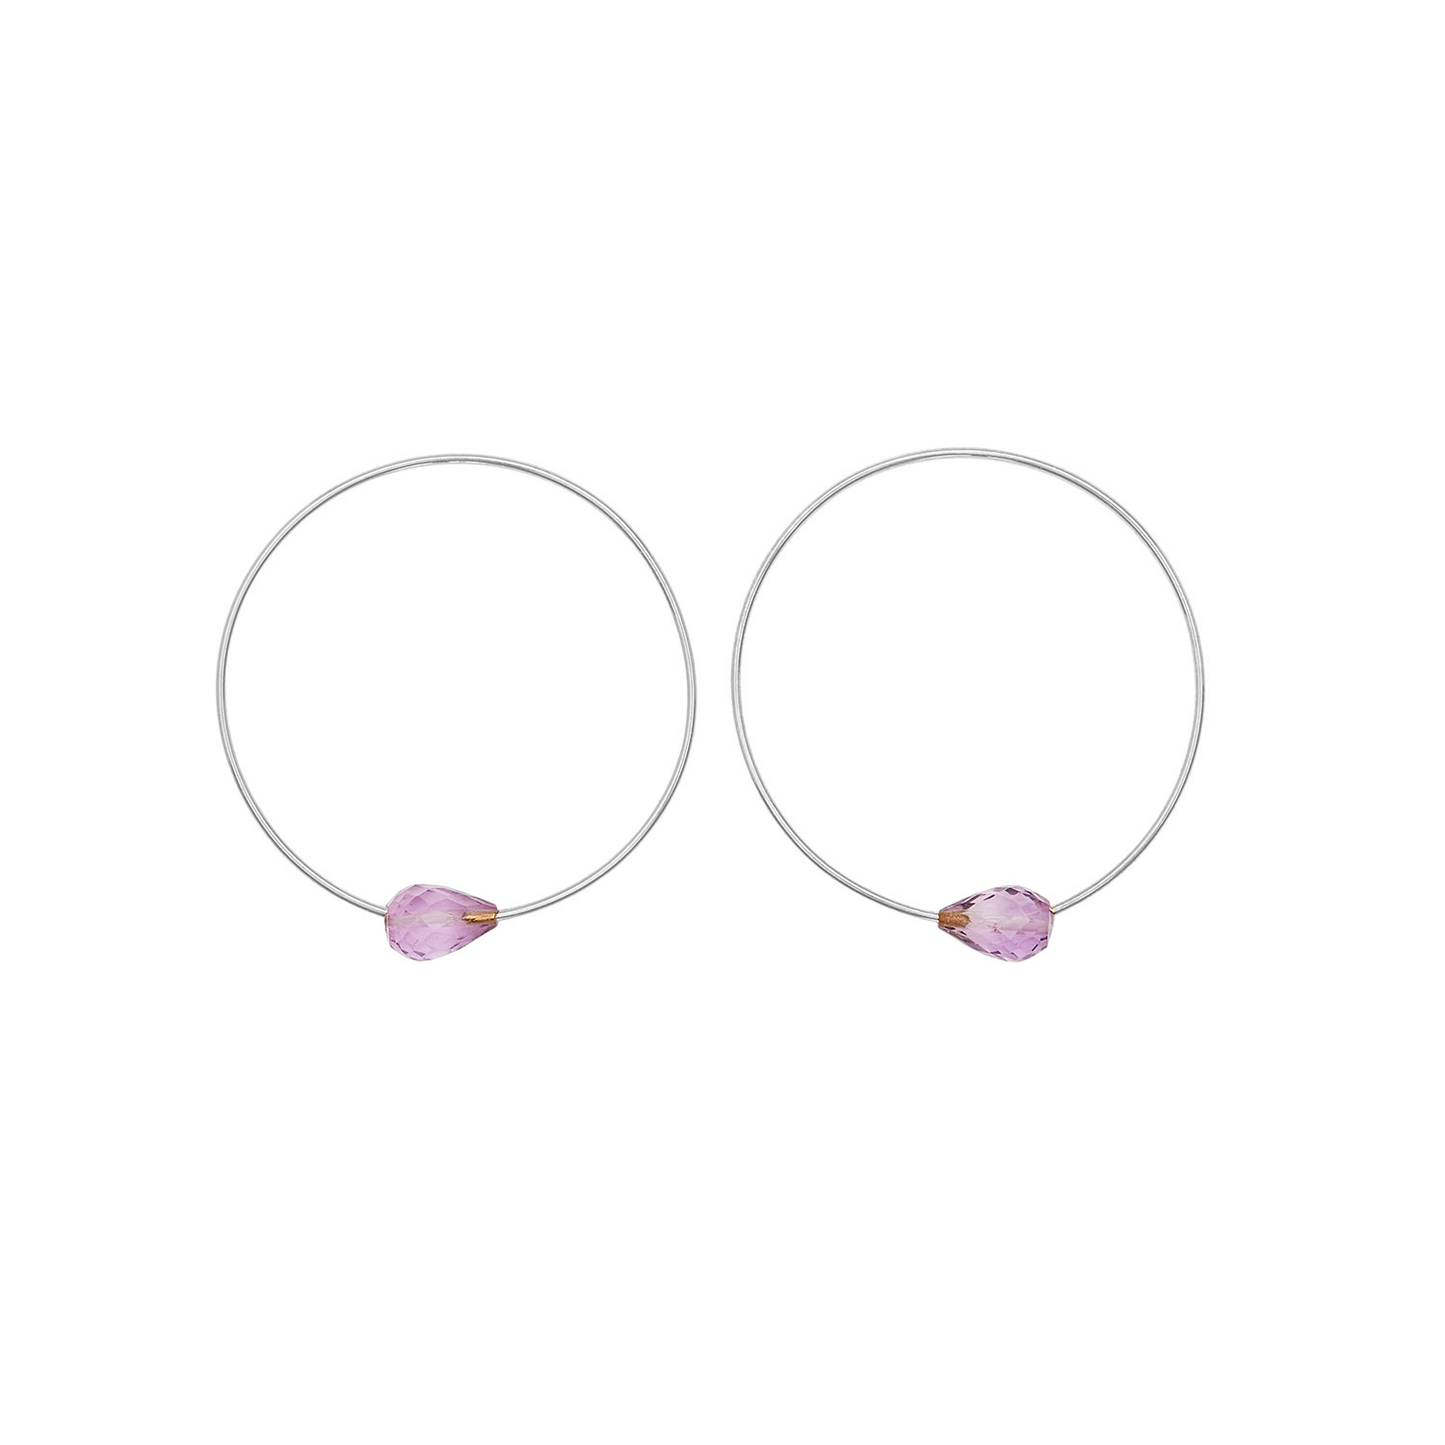 Extra Small Hoops with Drop Gems